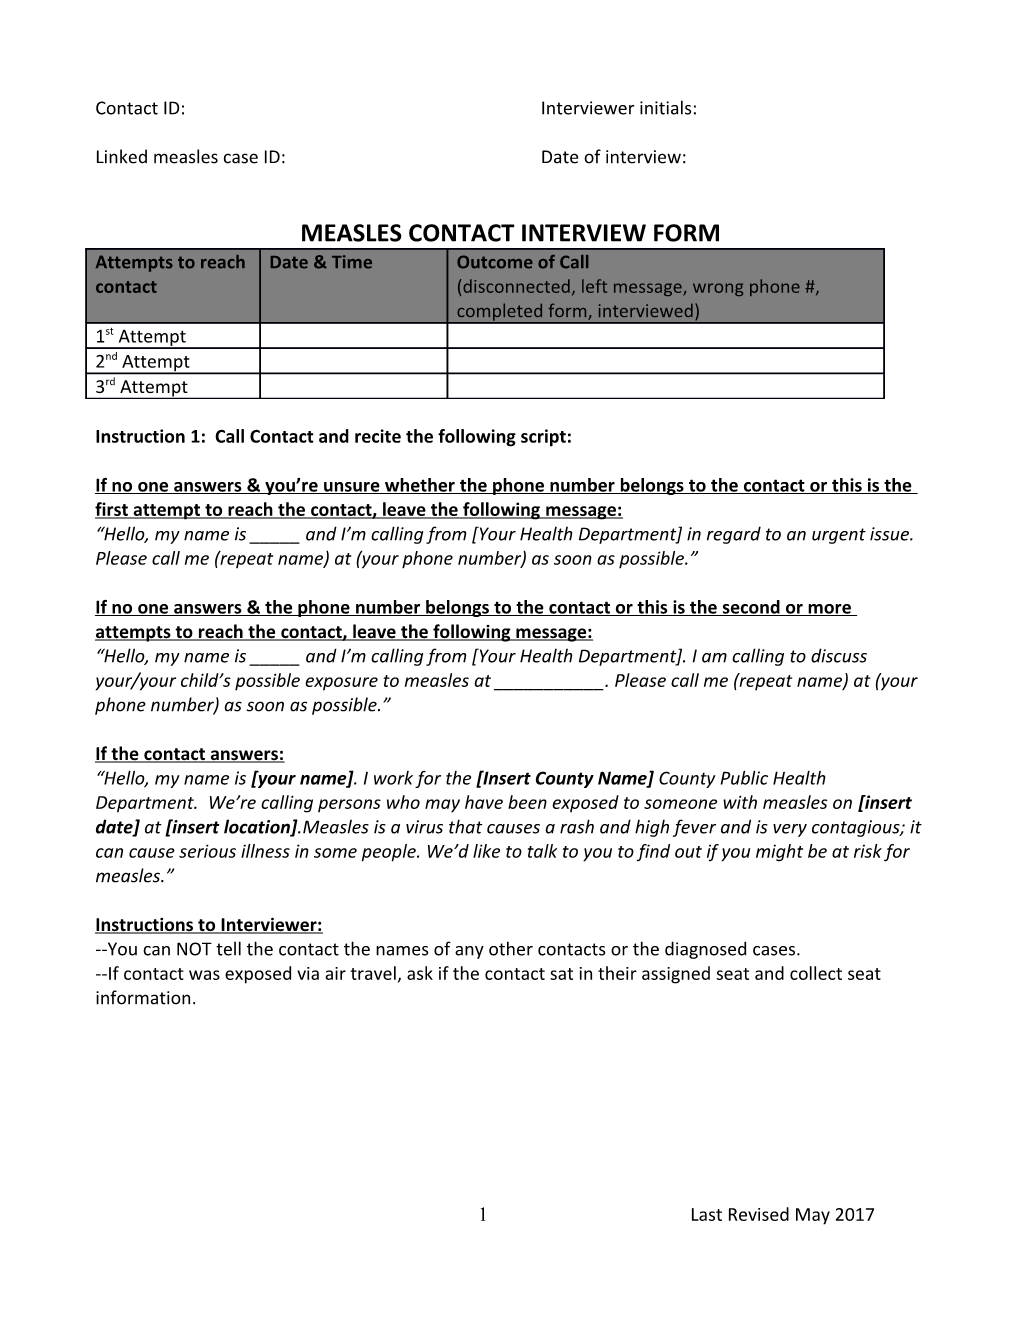 Measles Contact Interview Form